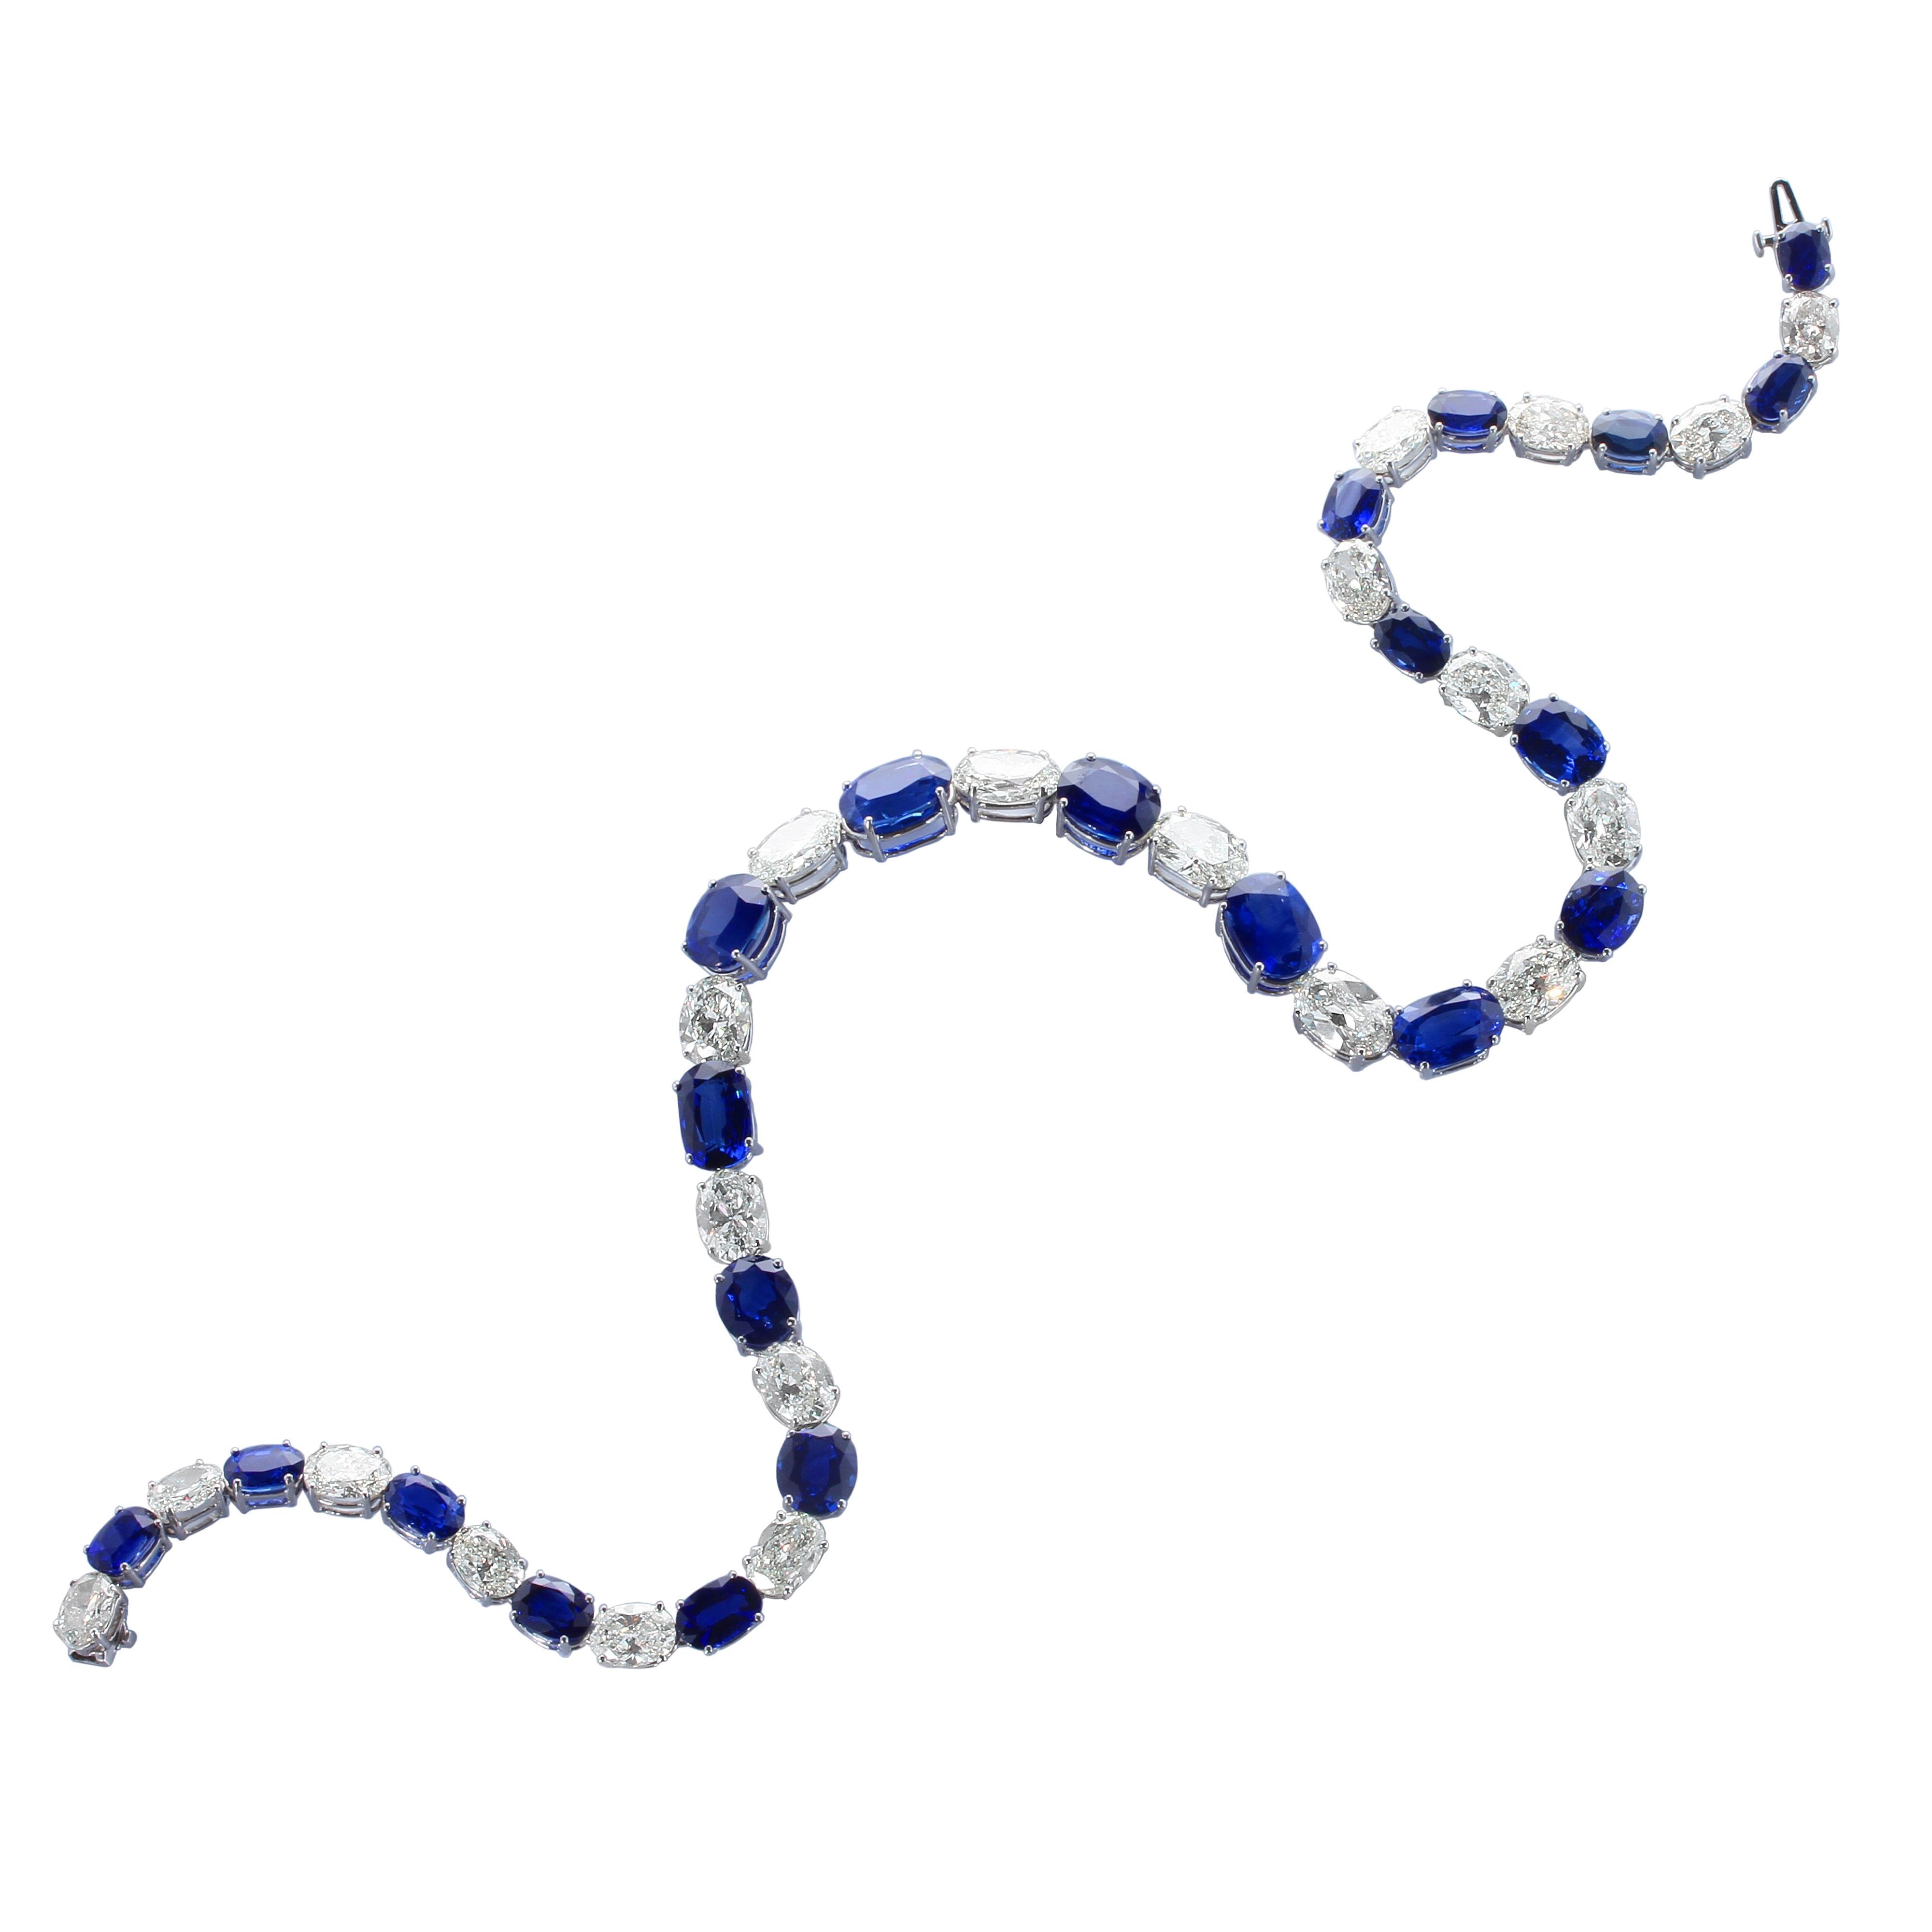 A highly impressive, brilliant, and well-crafted sapphire and diamond eternity necklace with twenty-one oval mixed-cut blue sapphires weighing a total of approximately eighty carats, alternating with twenty-one oval-shaped brilliant-cut diamonds